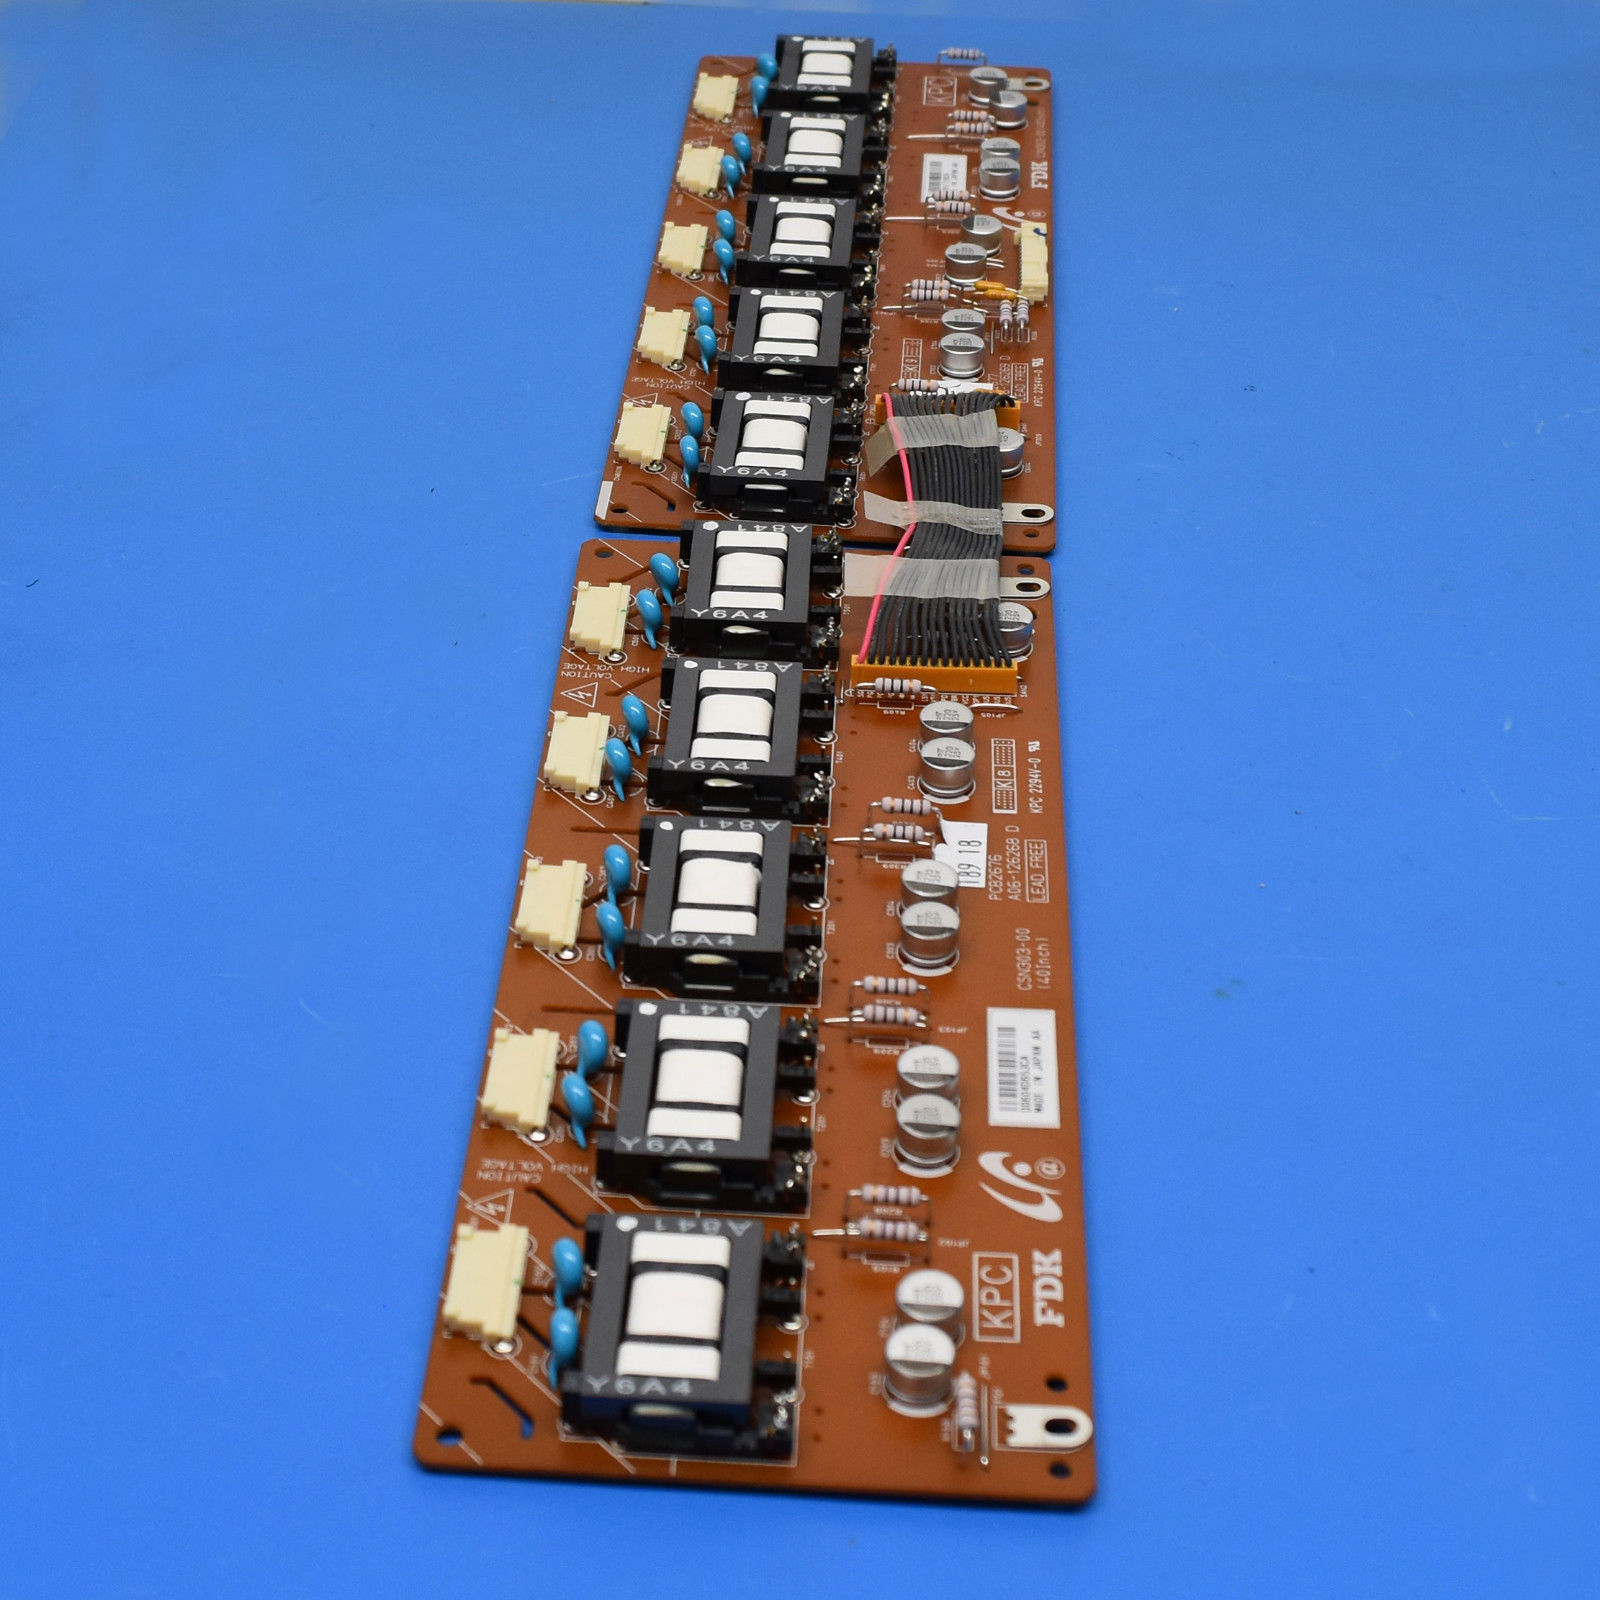 Sony 1-789-500-33 (PCB2677 PCB2676 A06-126268G A06-126269G ) Bac - Click Image to Close